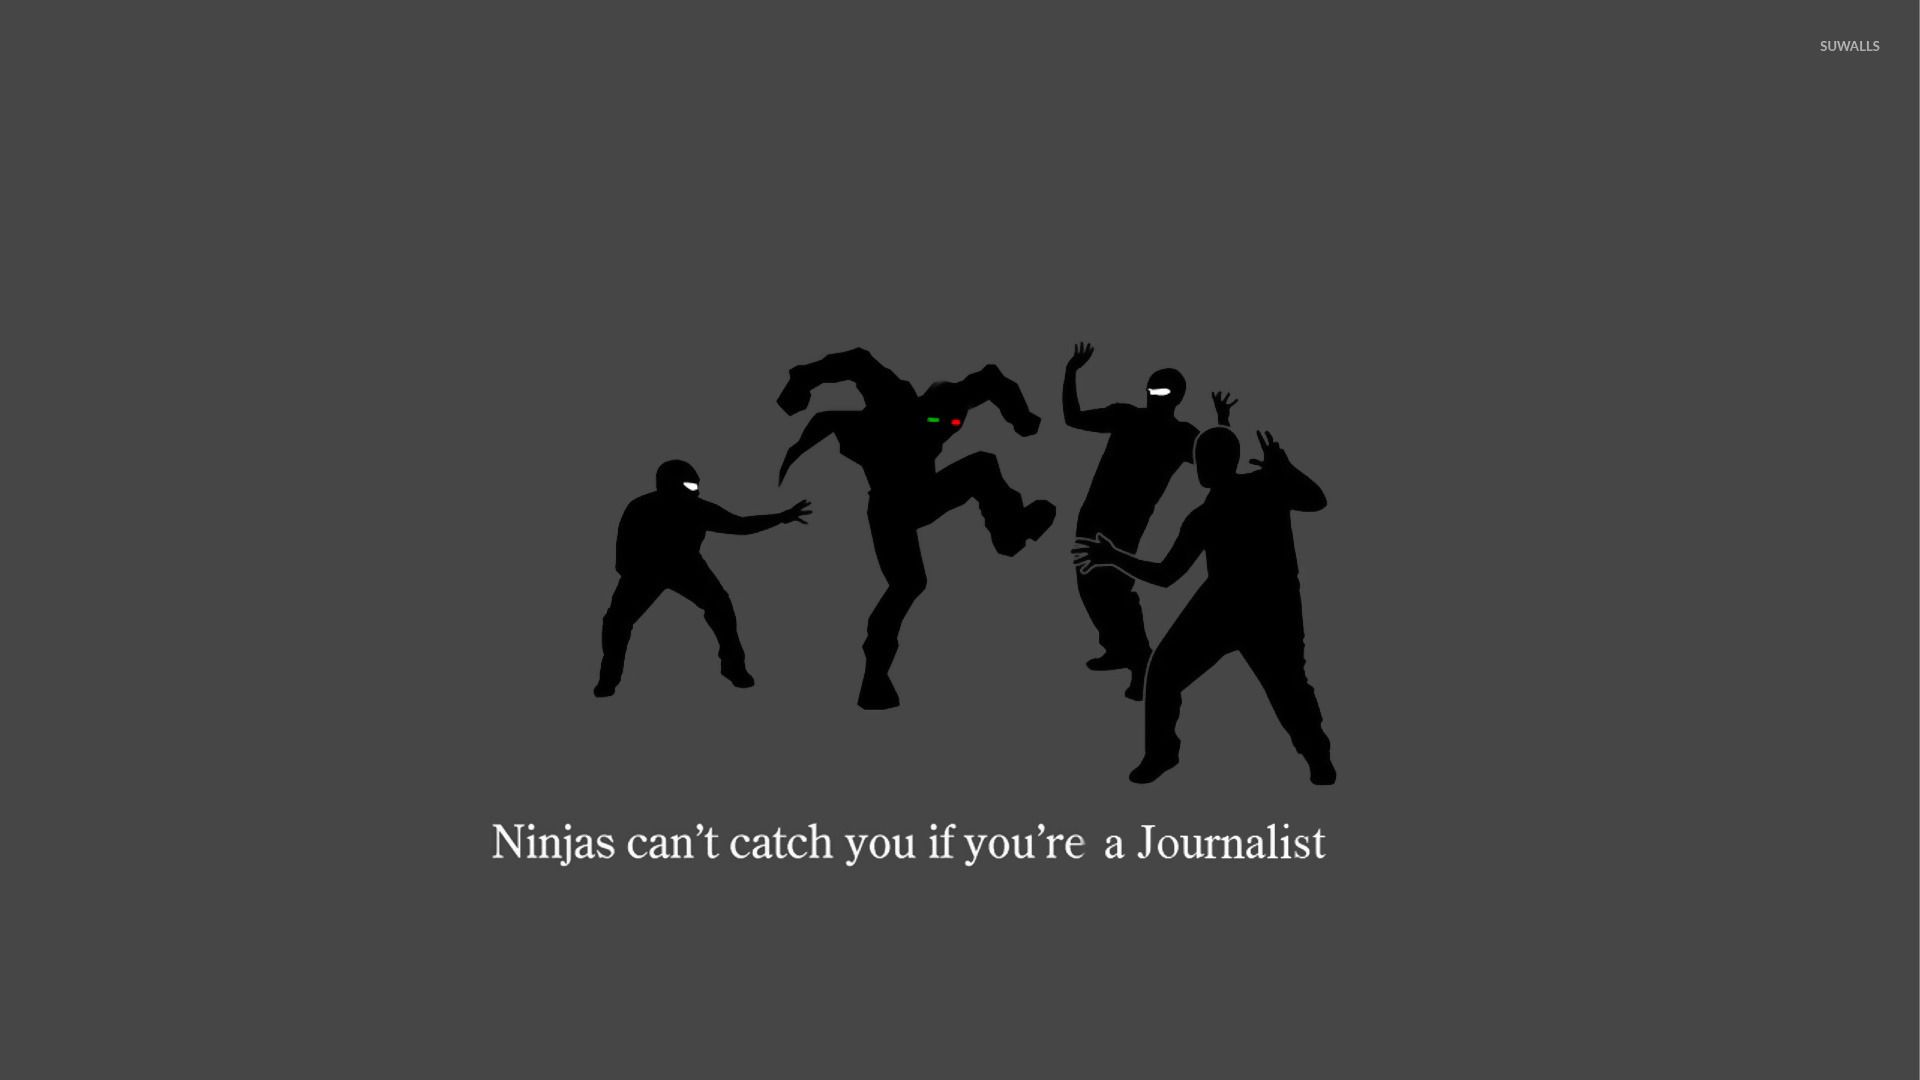 Ninjas can't catch you if you're a journalist wallpaper